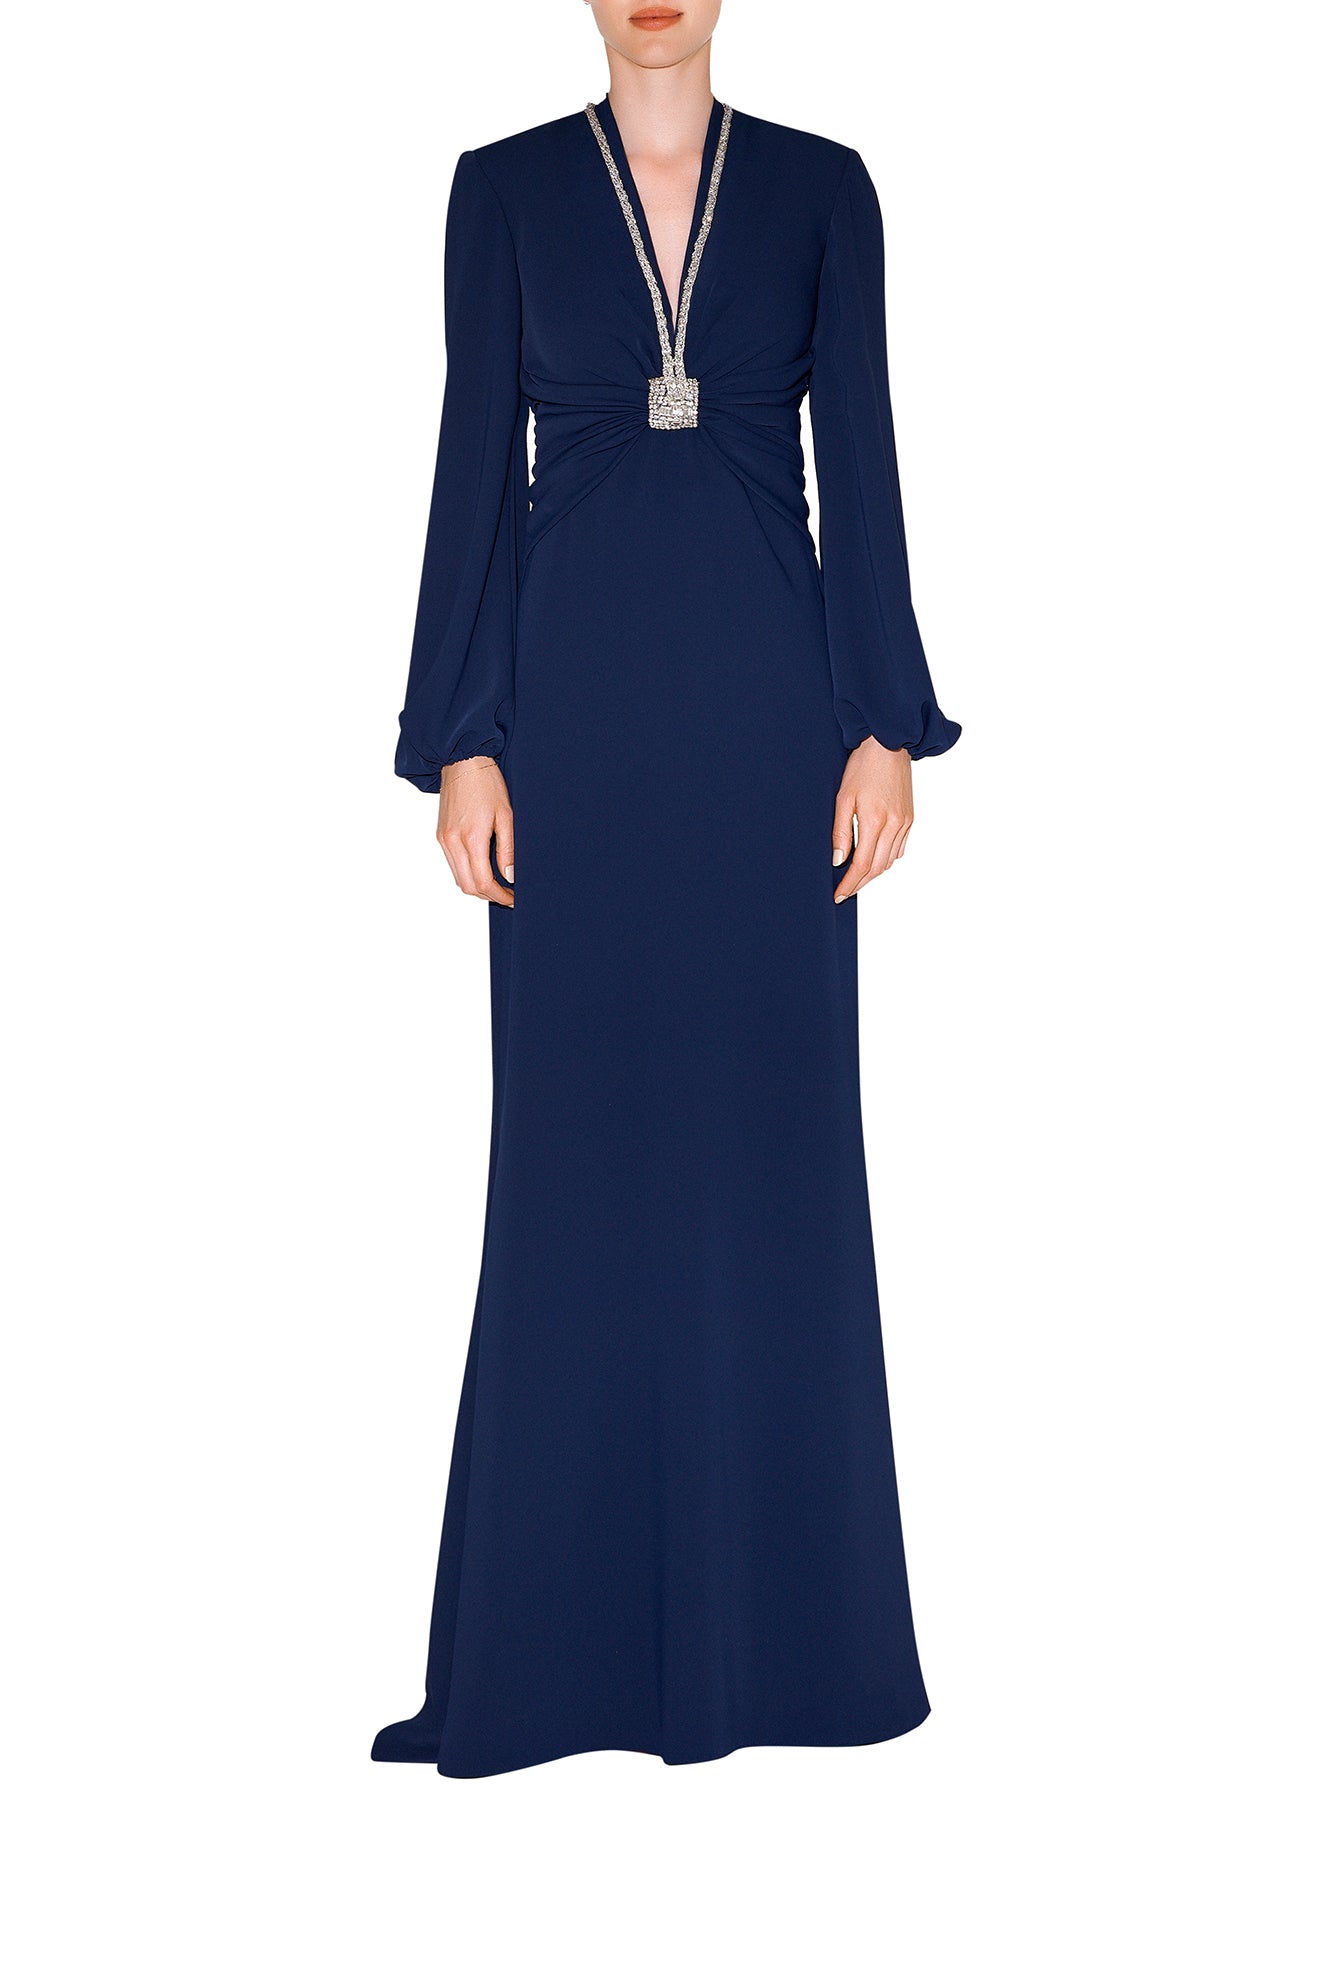 LONG BLOUSON SLEEVE, PLUNGING V-NECK DRESS WITH CRYSTAL NECKLACE DETAIL